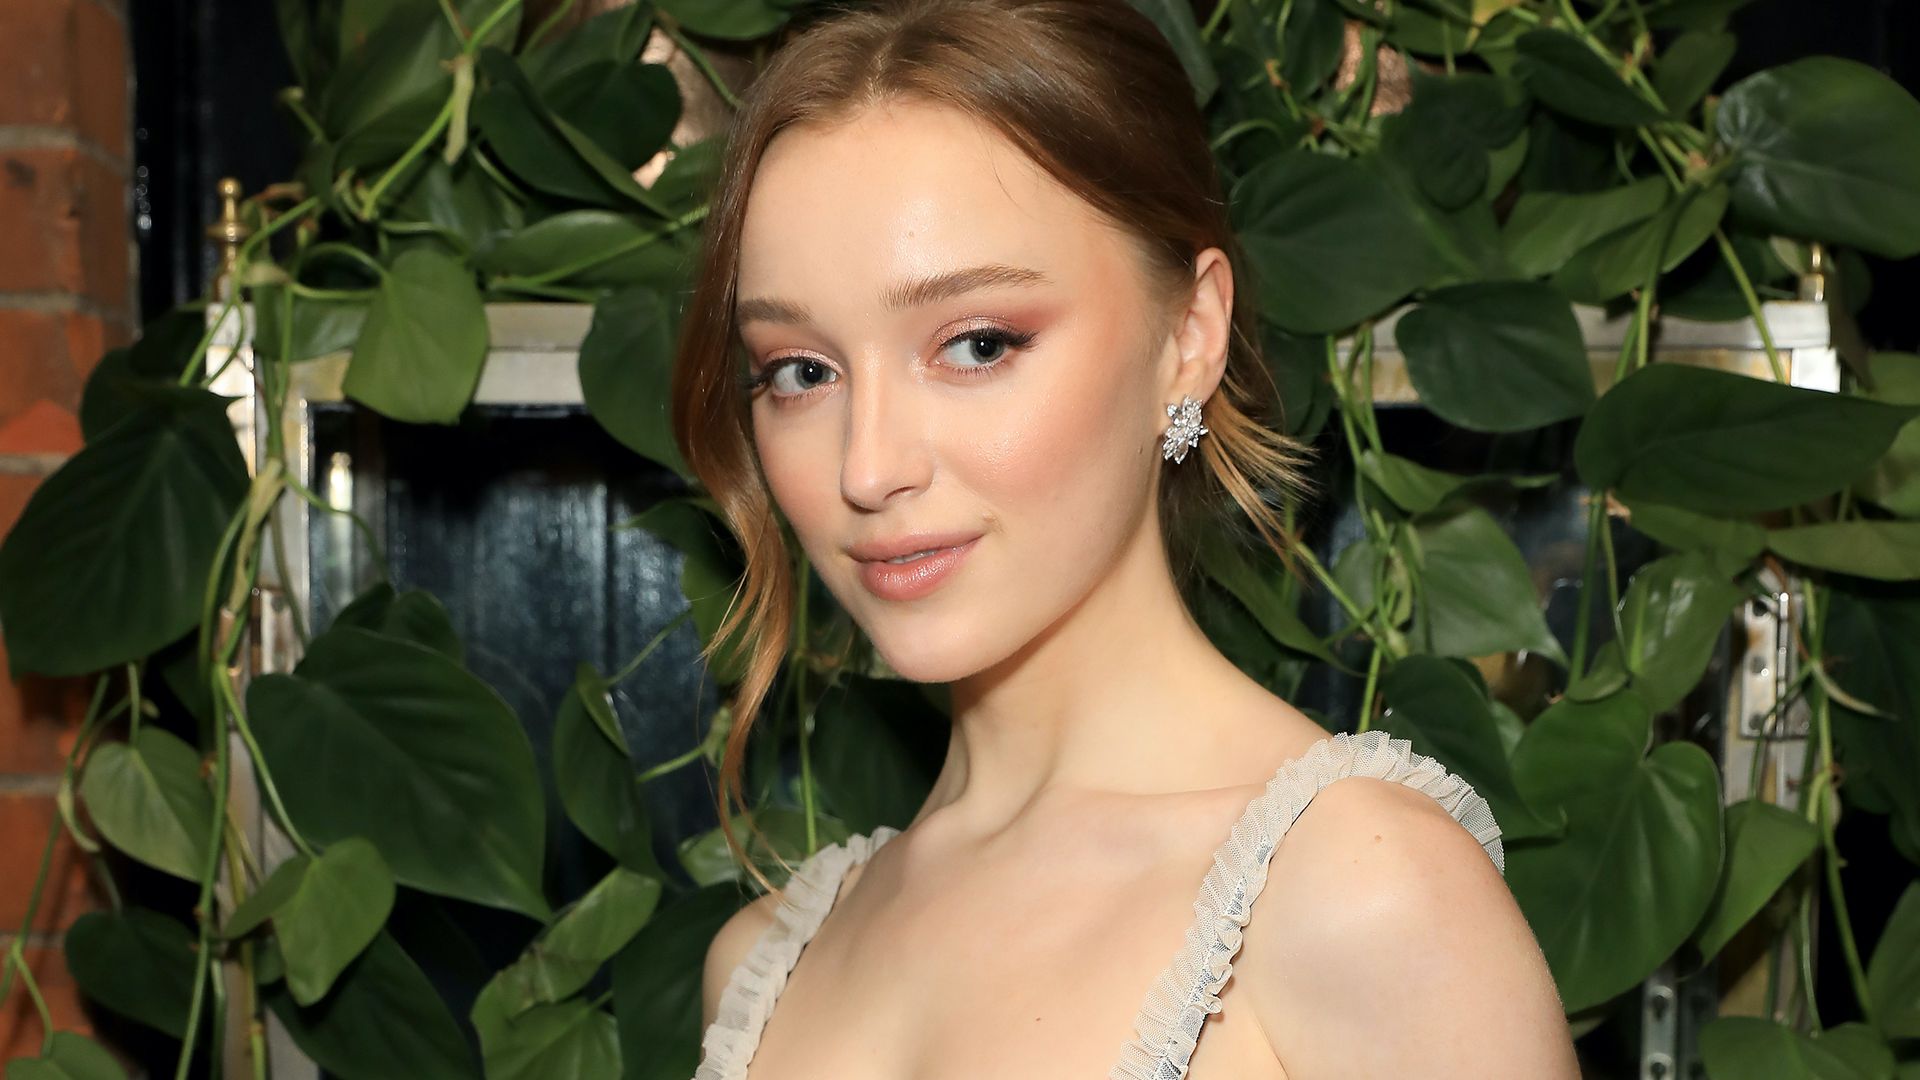 The actress Phoebe Dynevor